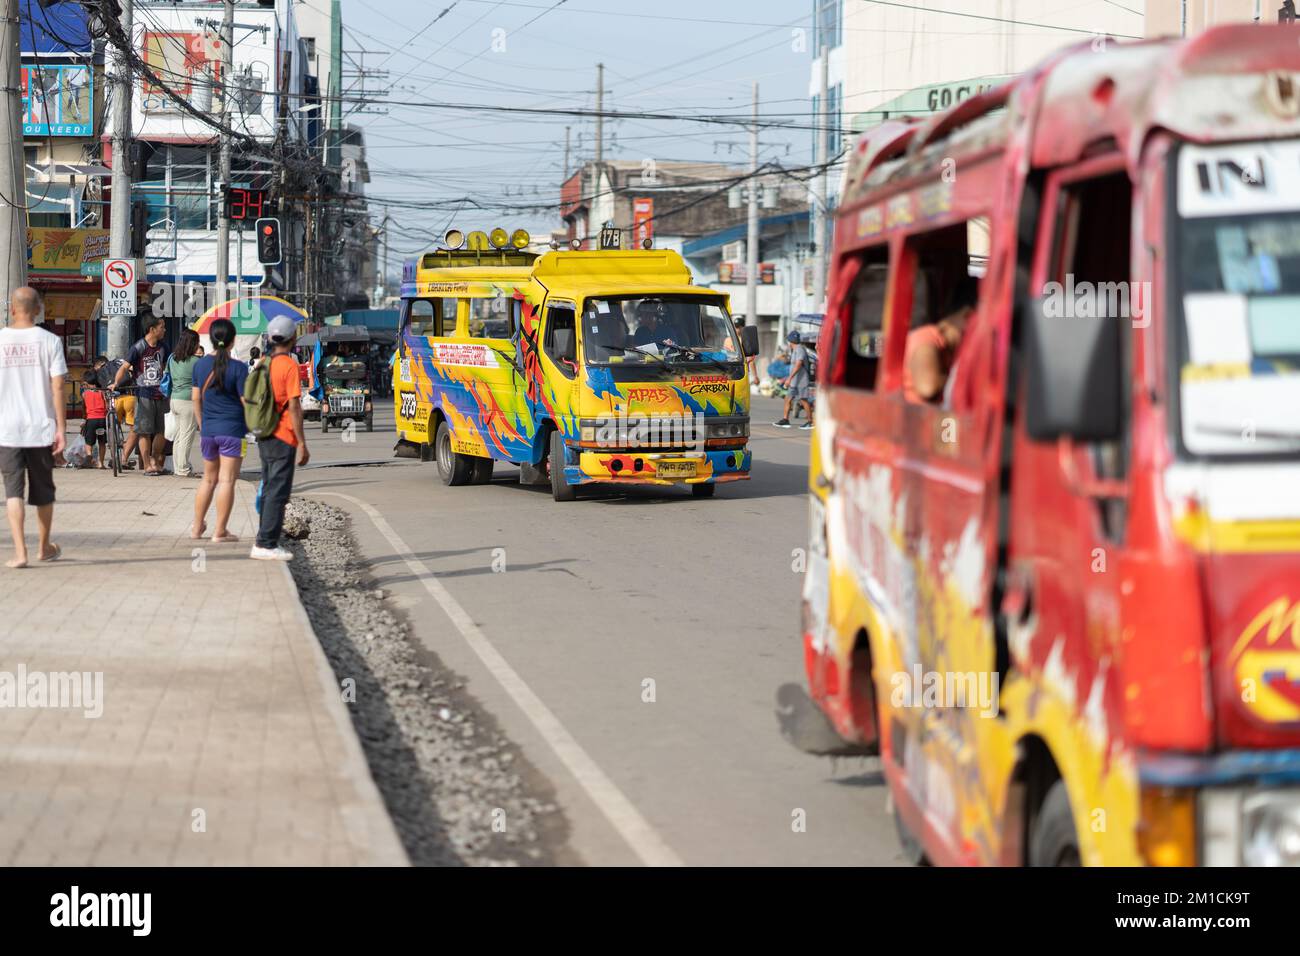 Multicabs are widely used for public transport in the Philippines. These vehicles are adapted, lengthening the chasis to take more passengers. Stock Photo